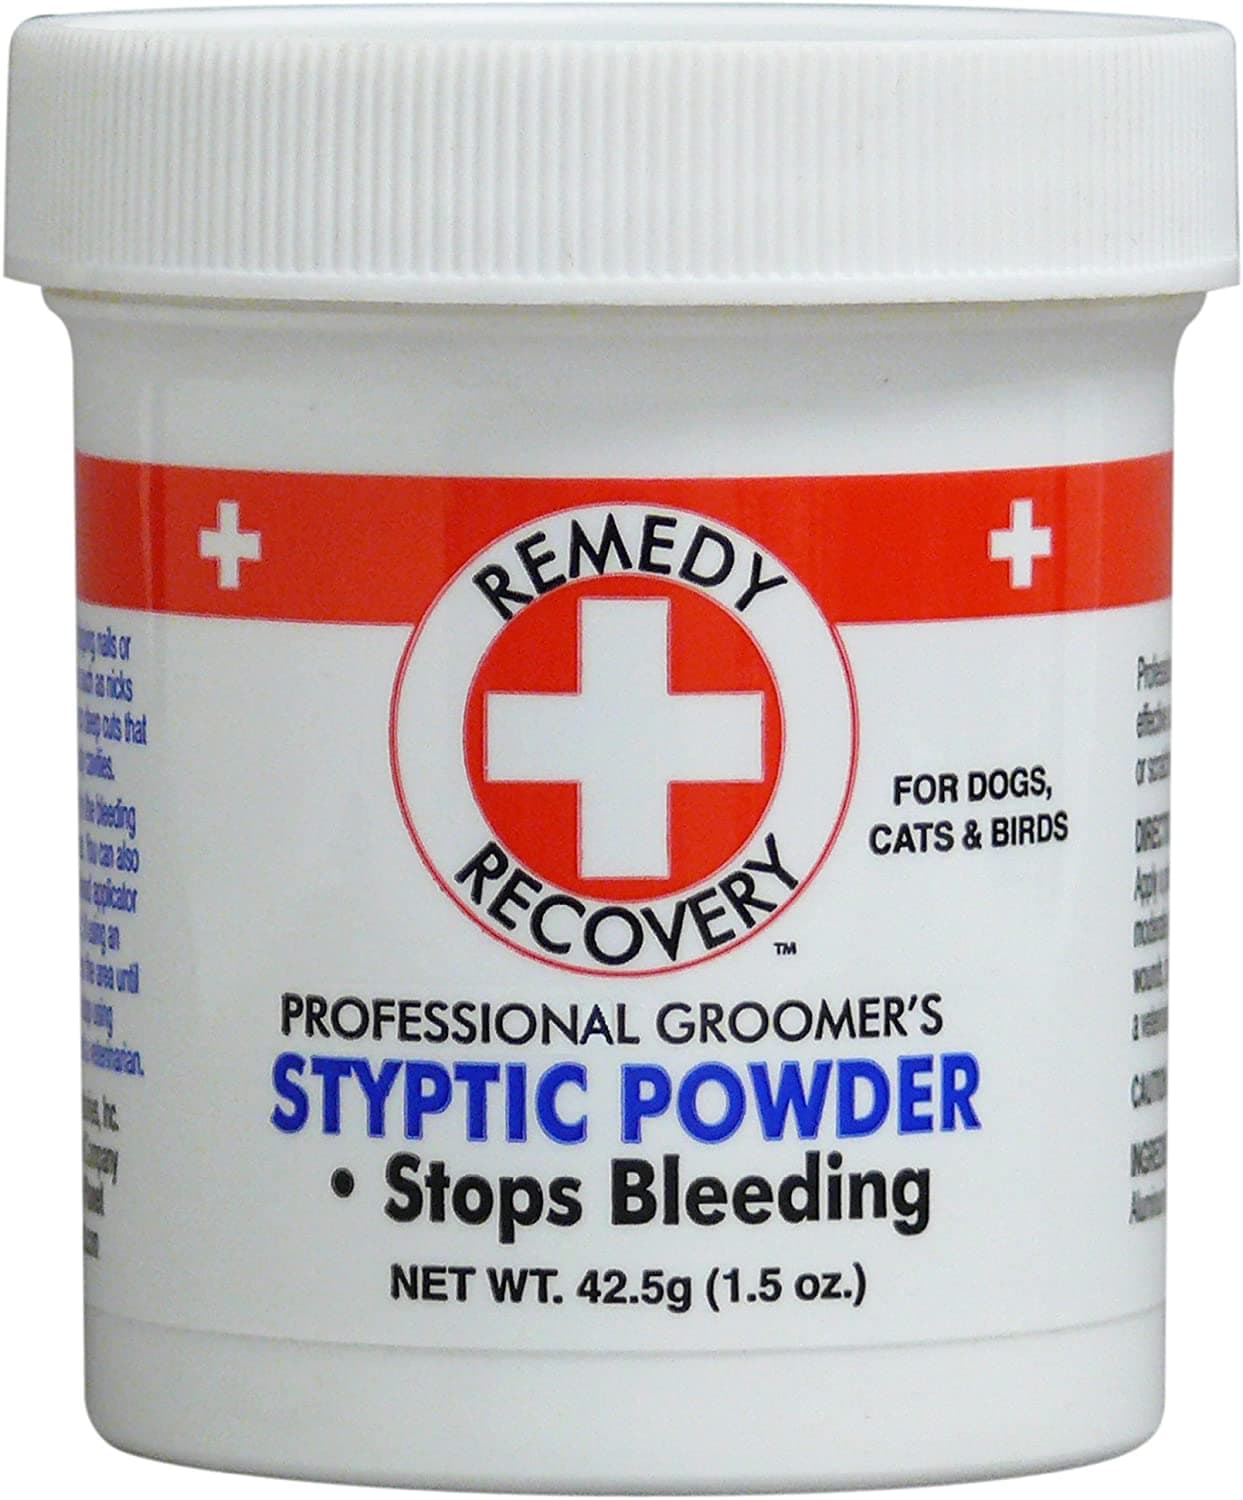 Remedy + Recovery Professional Groomer's Styptic Powder - 1.5 oz.